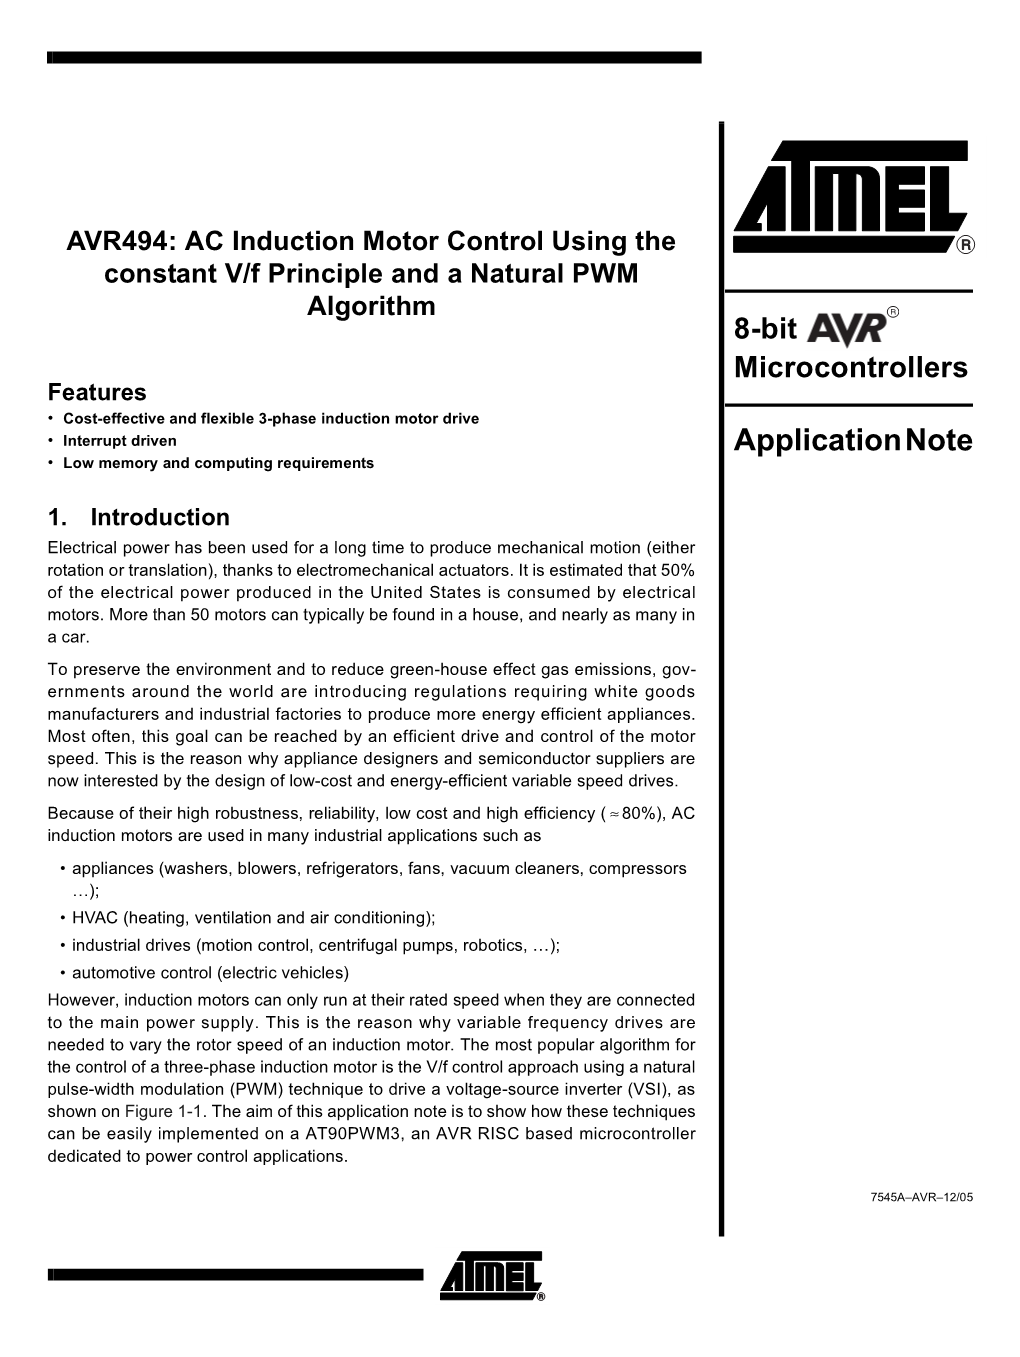 AC Induction Motor Control Using the Constant V/F Principle and a Natural